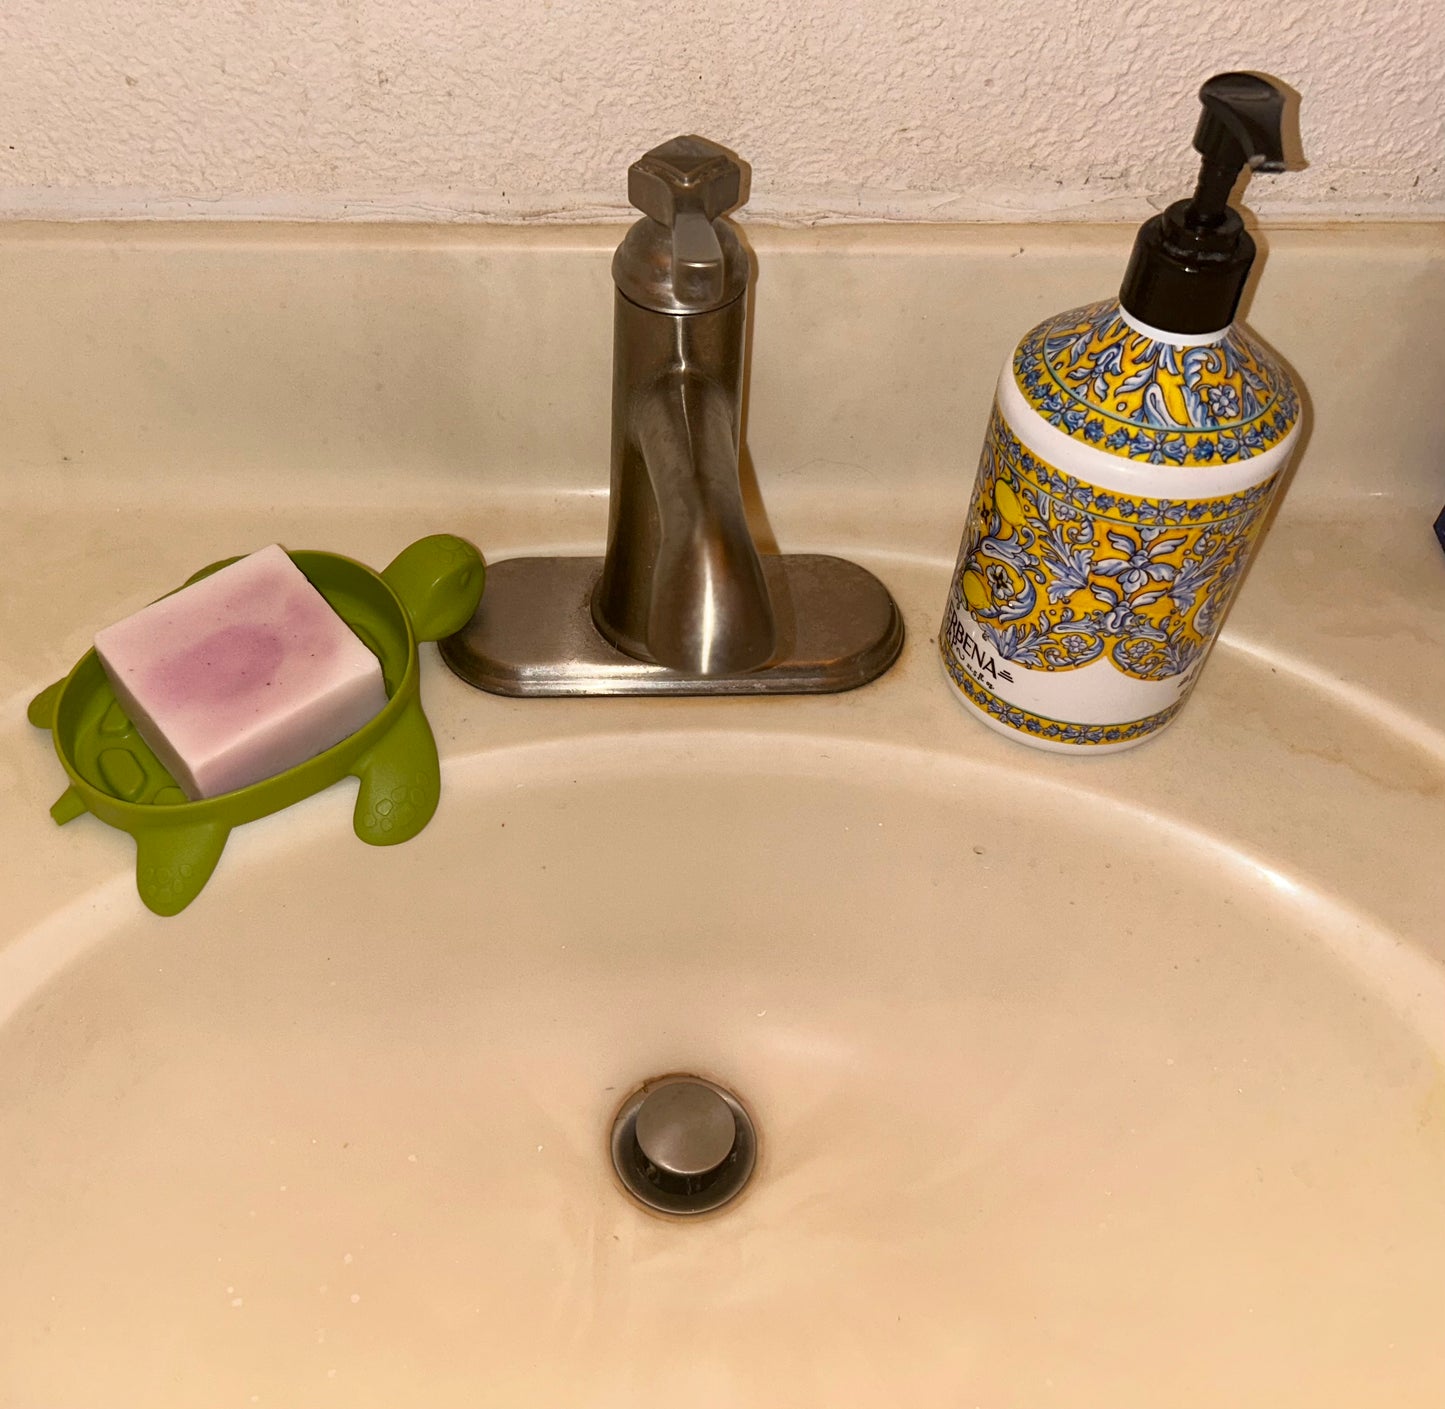 ****EXCLUSIVE TURTLEGANG TURTLE SOAP DISH*****